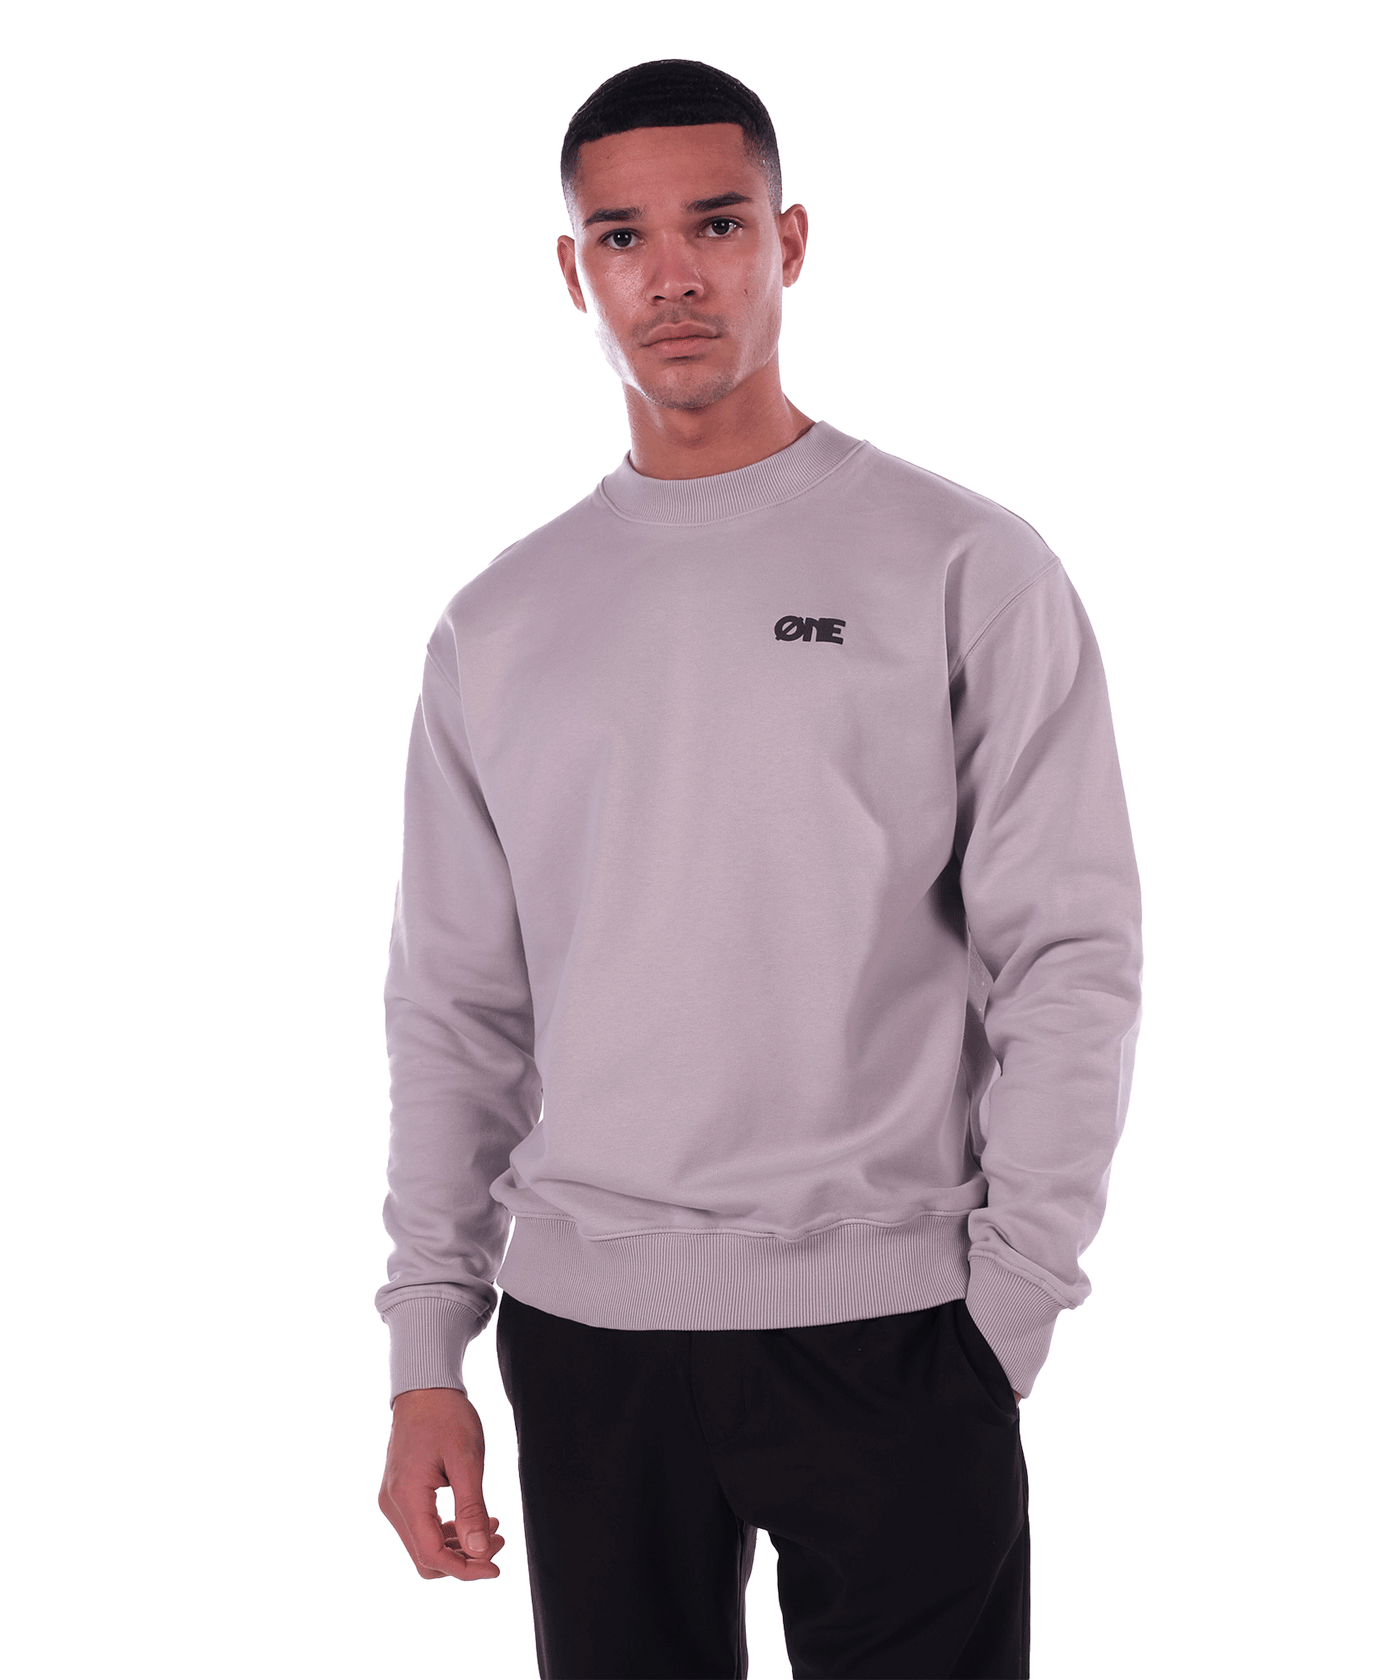 One First Movers - Puff Logo - Crewneck - Grey